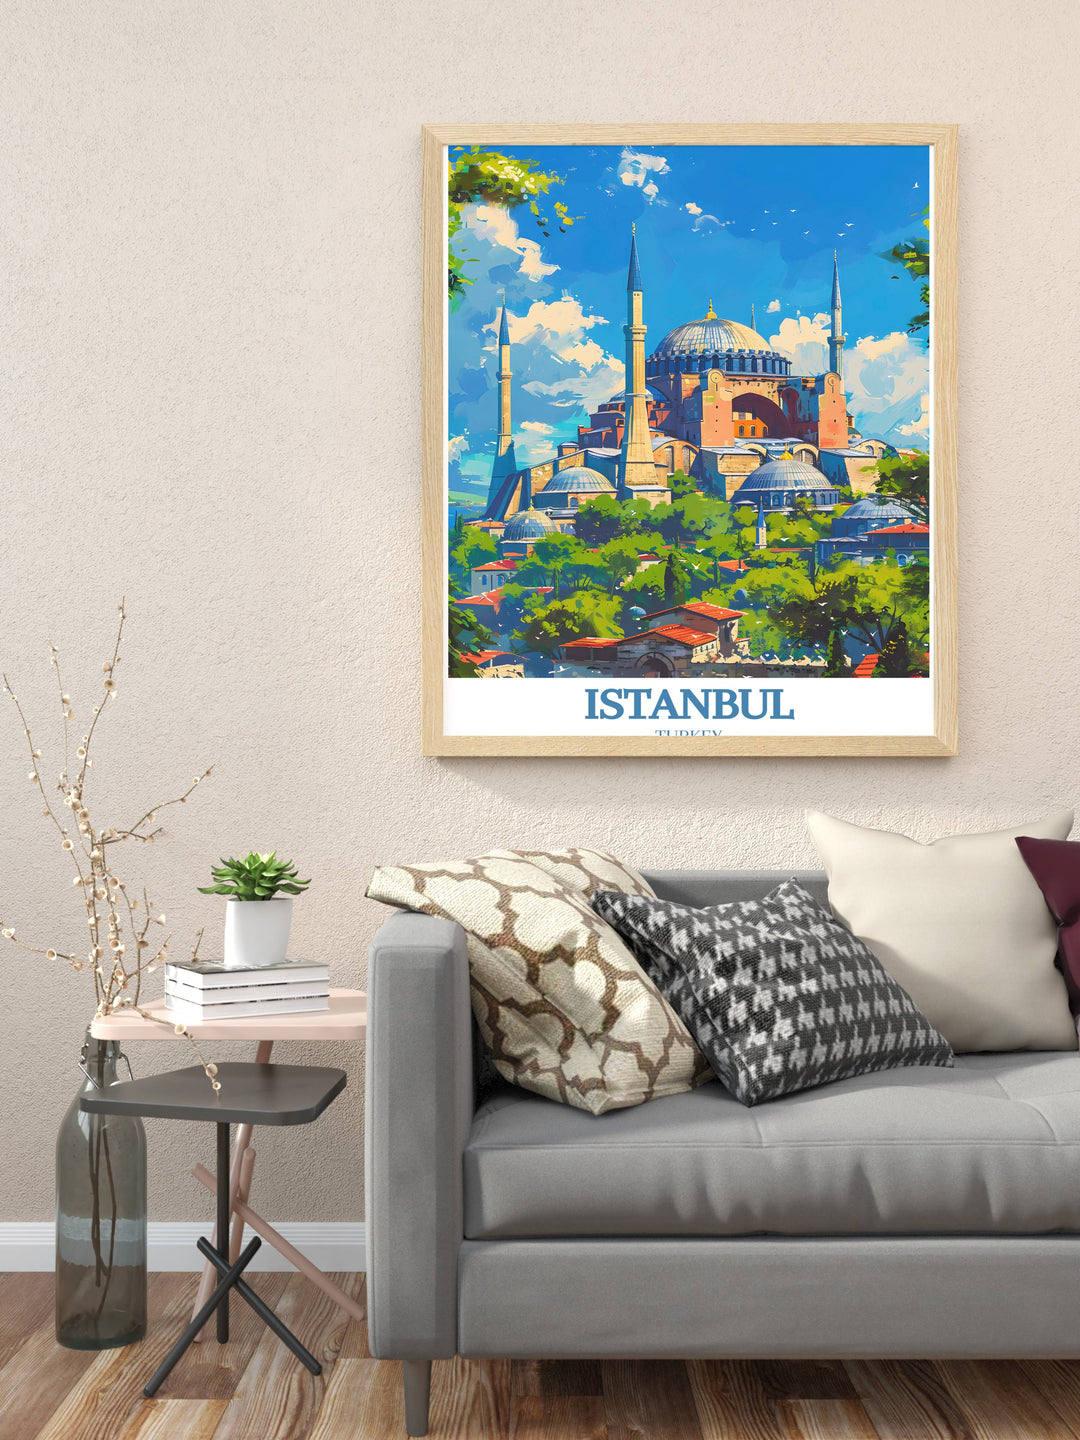 Istanbul gift featuring a beautifully detailed art print of the Hagia Sophia, ideal for commemorating visits or celebrating Turkish heritage.